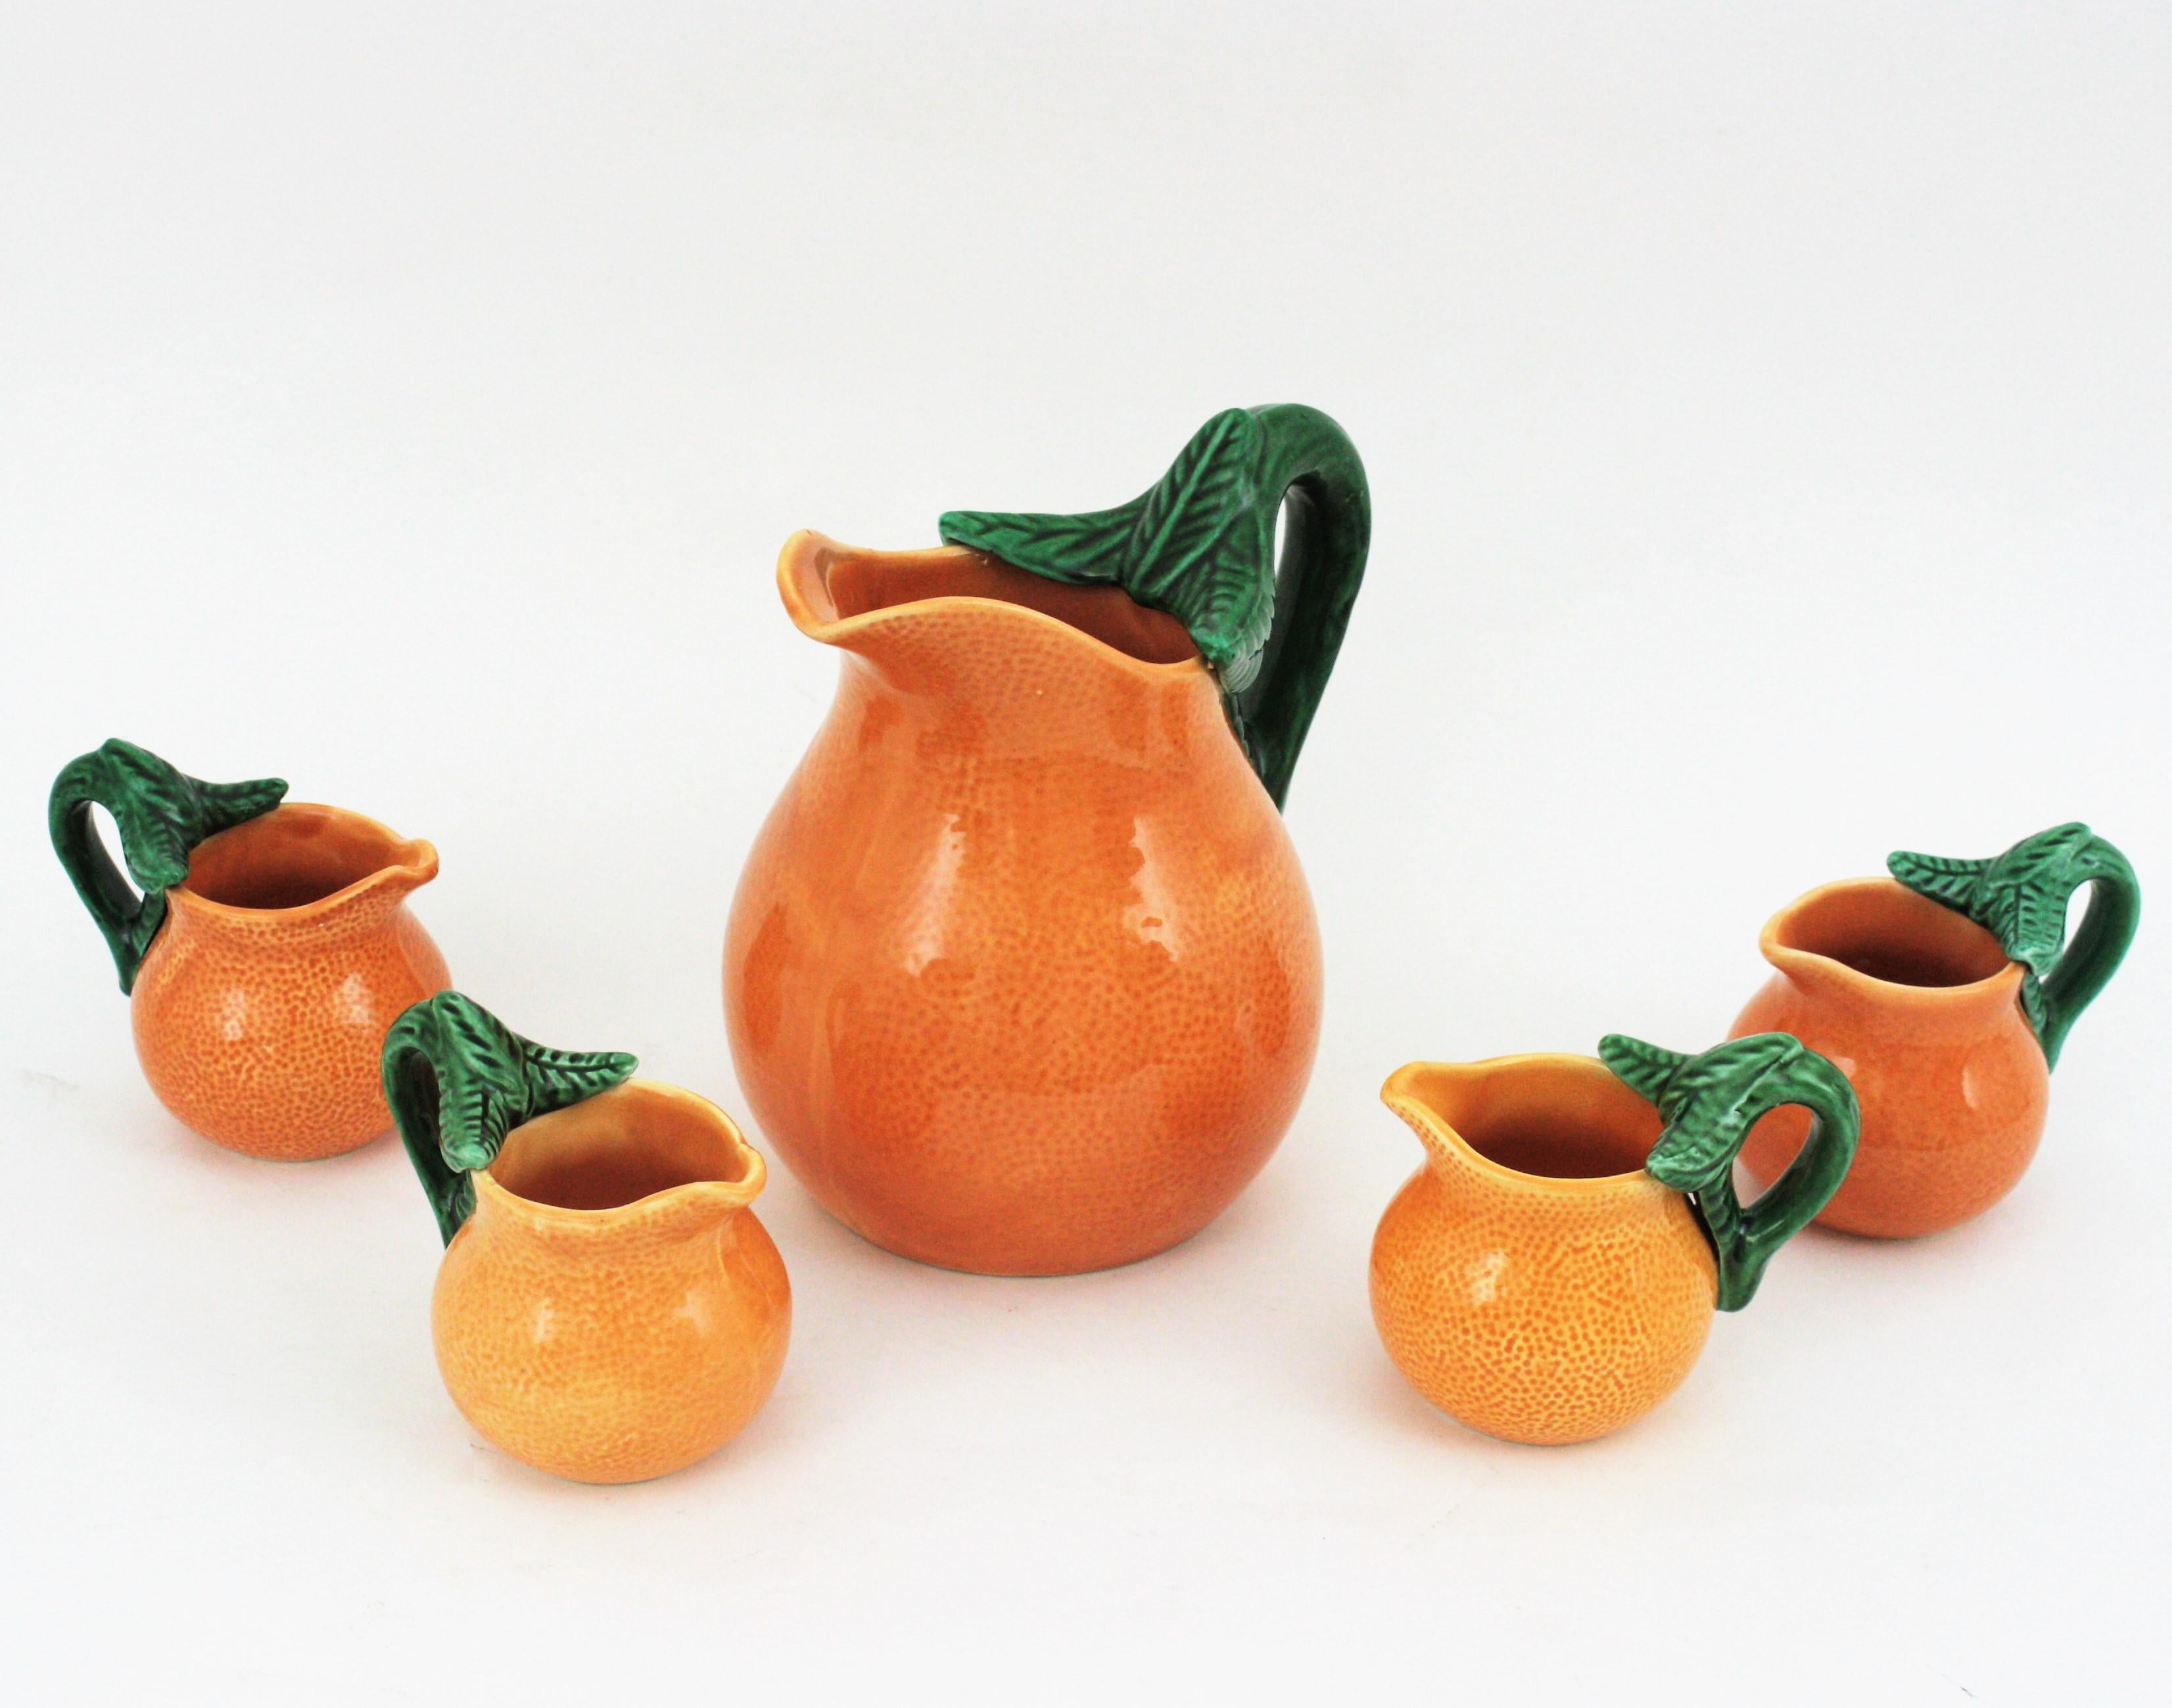 Coffee or tea sea set orange design, Spain, 1960s.
Cool set of hand-painted glazed ceramic orange shaped tea, coffee or breakfast serving set for four. The set is comprised by a large ceramic jug with orange shape and four ceramic cups same